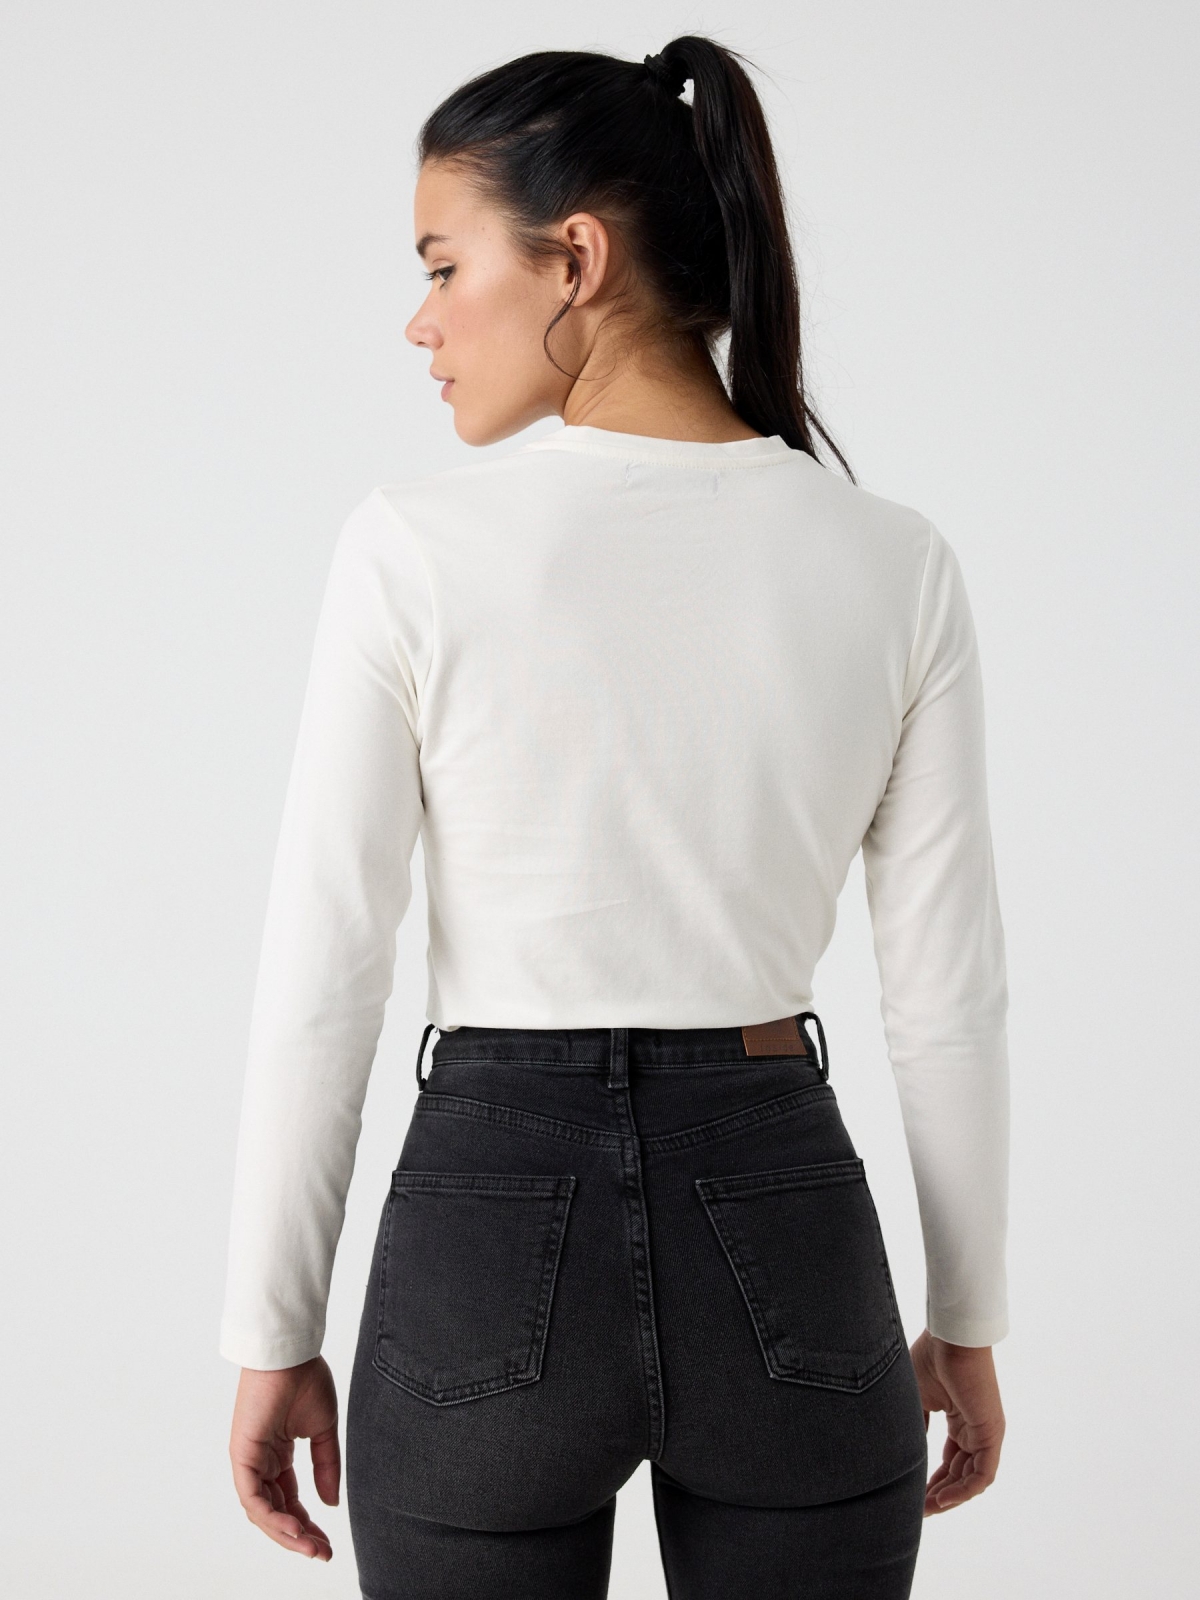 Slim T-shirt with cut out off white middle back view